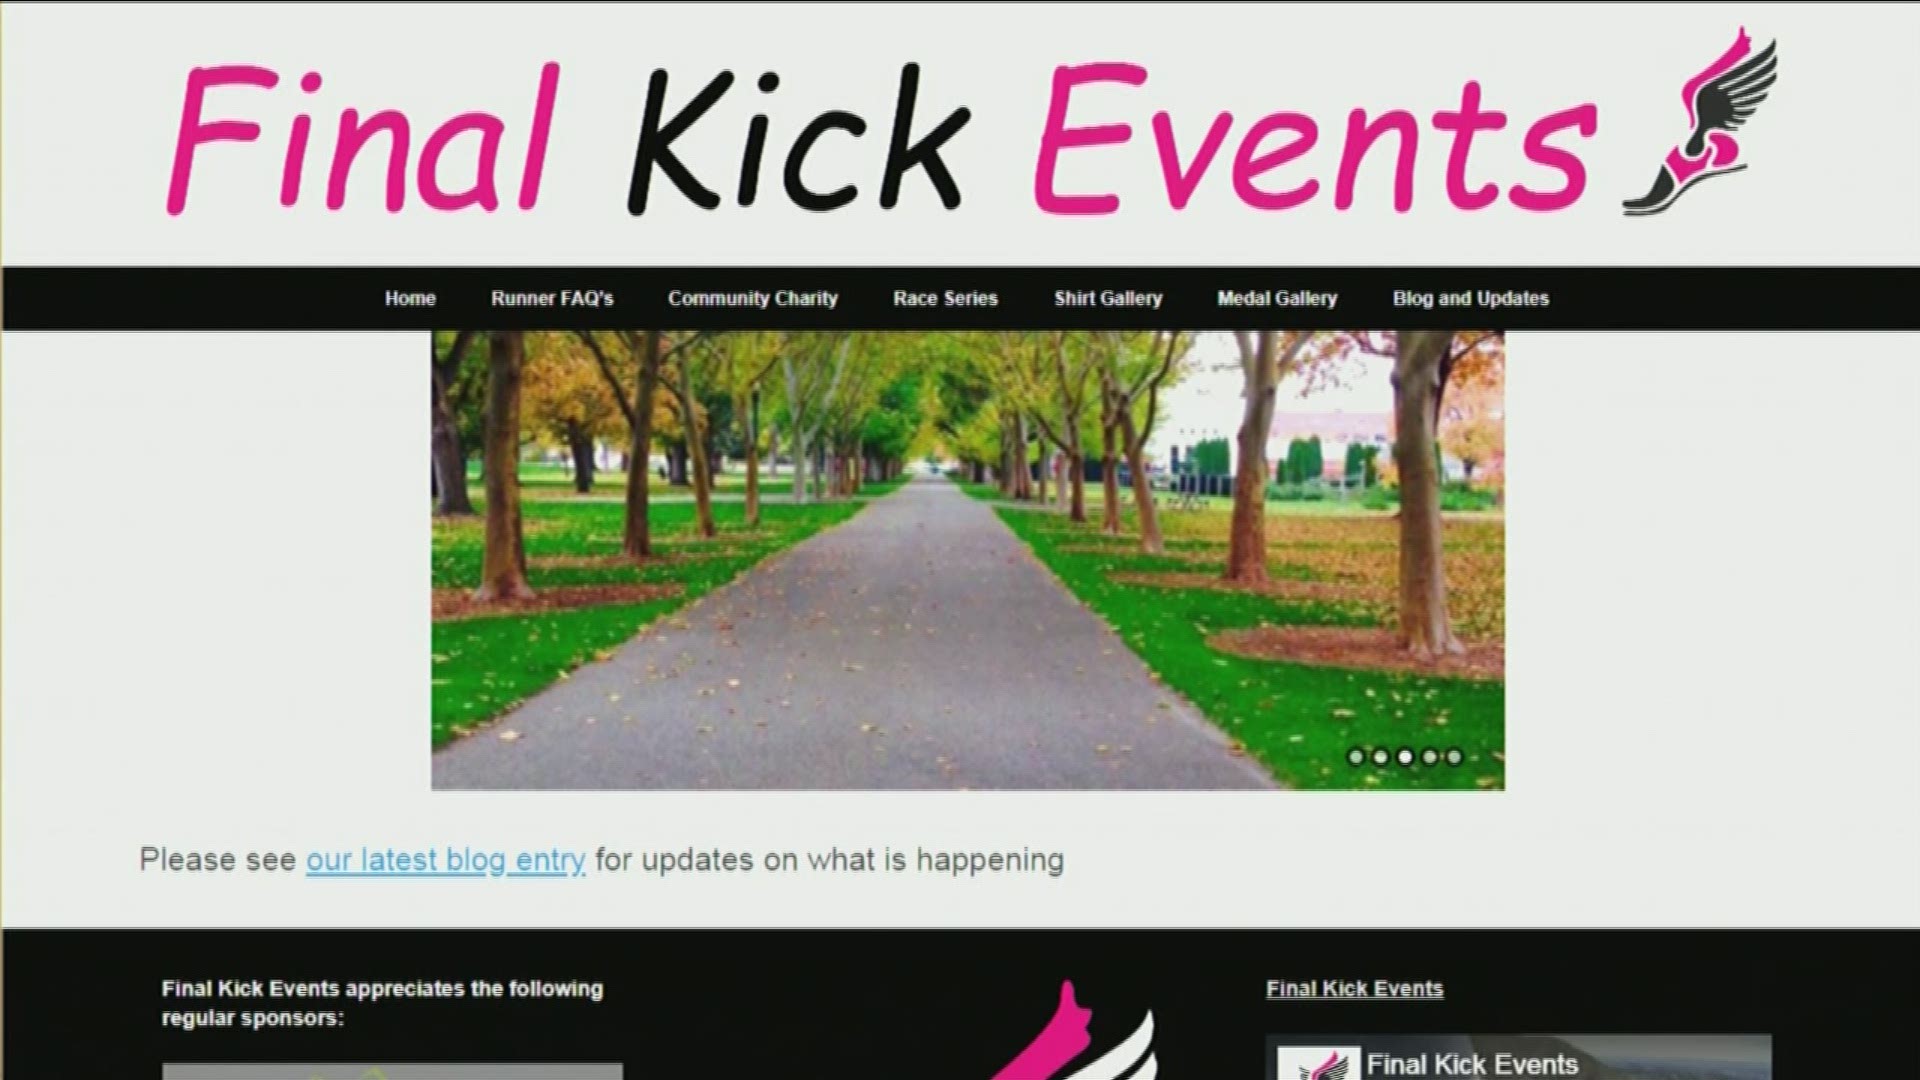 Final Kick hosted a variety of racing events.